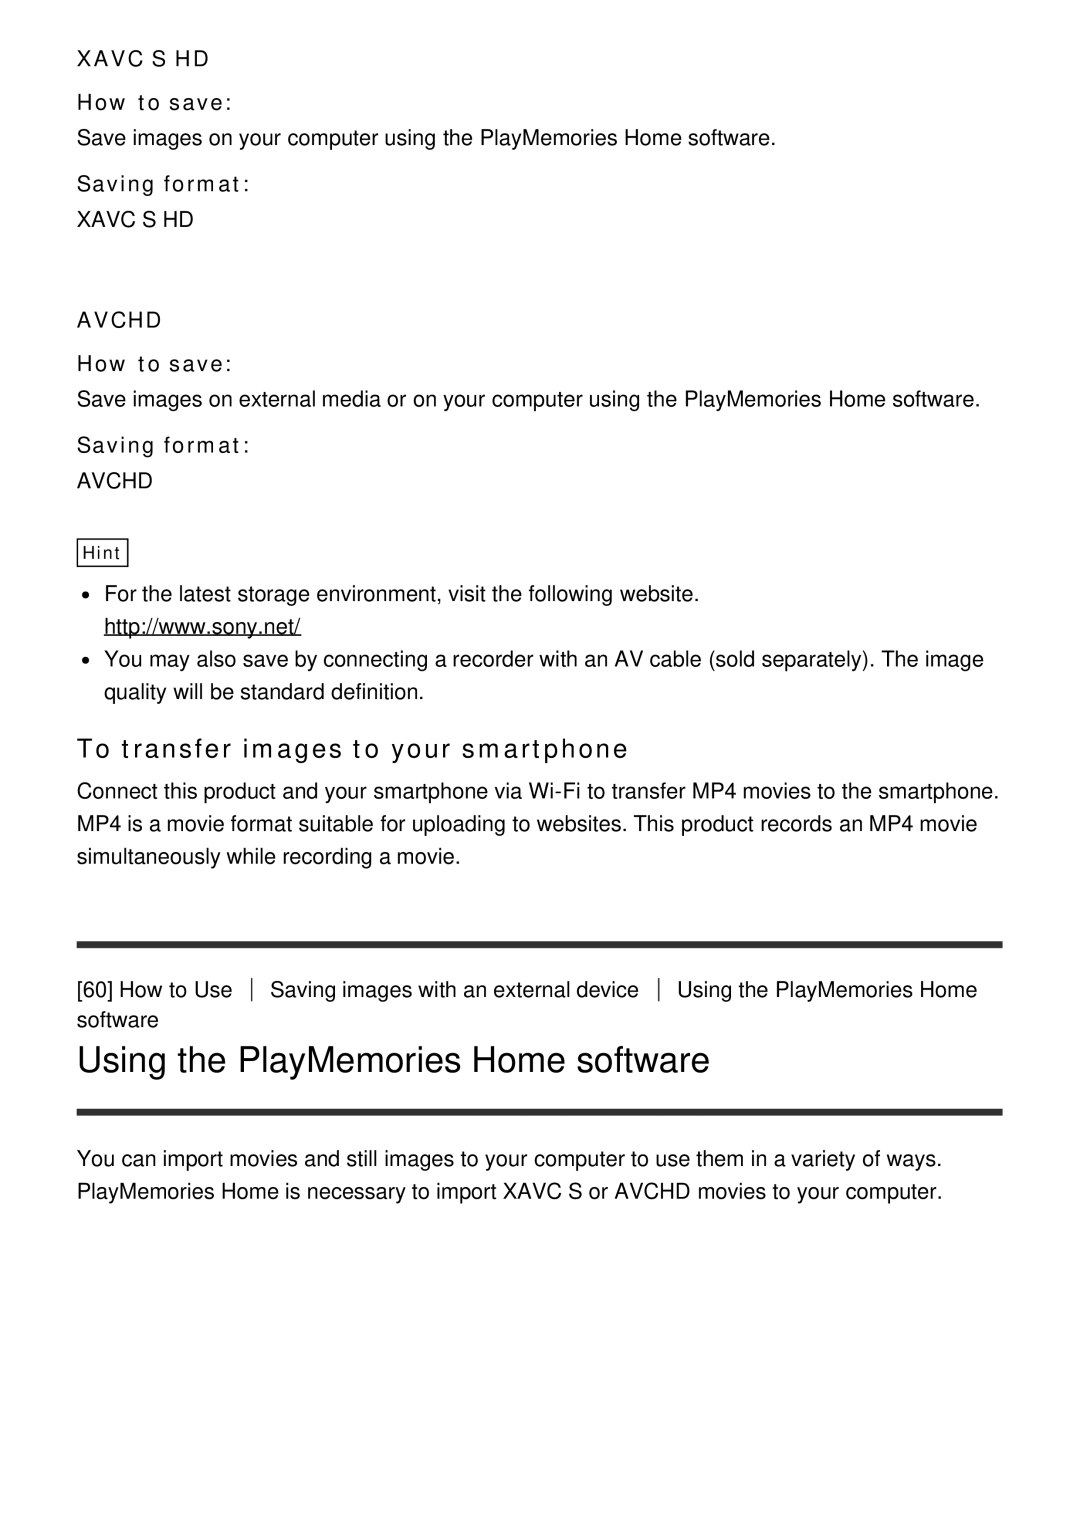 Sony FDR-AX100 manual Using the PlayMemories Home software, To transfer images to your smartphone, XAVC S HD How to save 